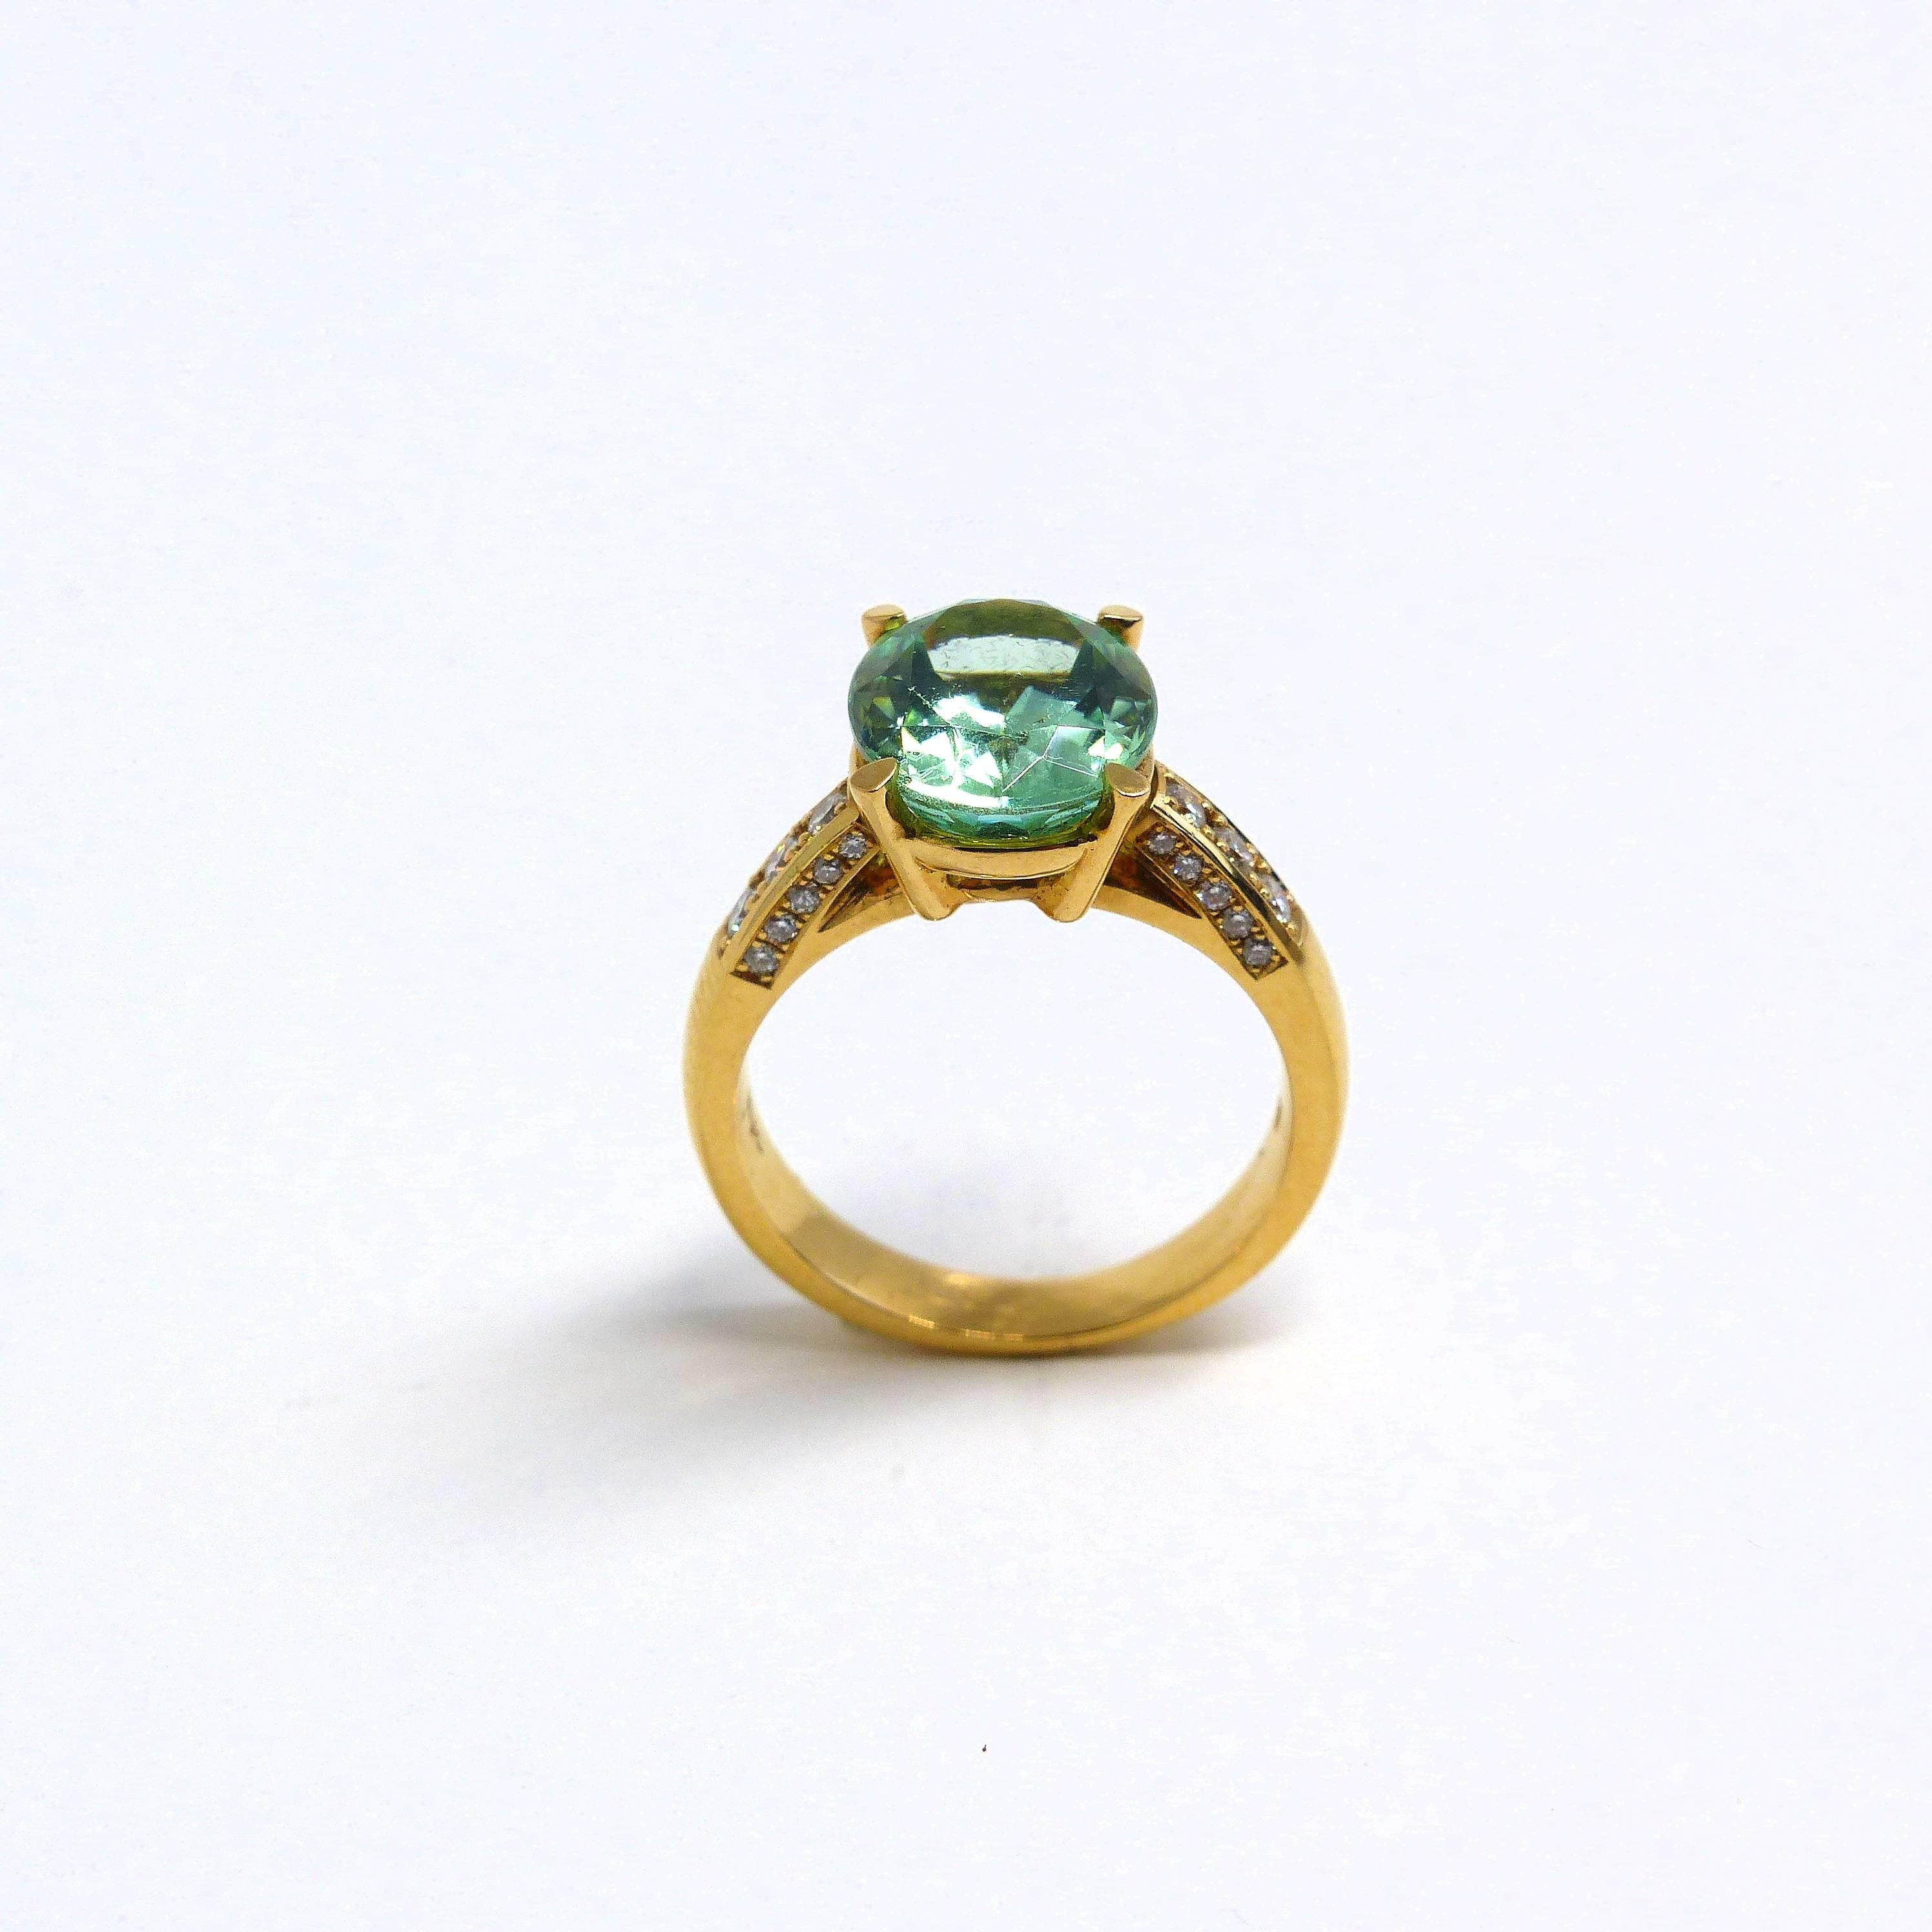 This 18k rose gold (7.73g) ring is set with 1x fine Green Tourmaline (facetted, oval, 12x10mm, 4.38ct) + 26x diamonds (brillant cut, 1-2mm, G/VS, 0.32cts). 

Ringsize 6 3/4 (54).
